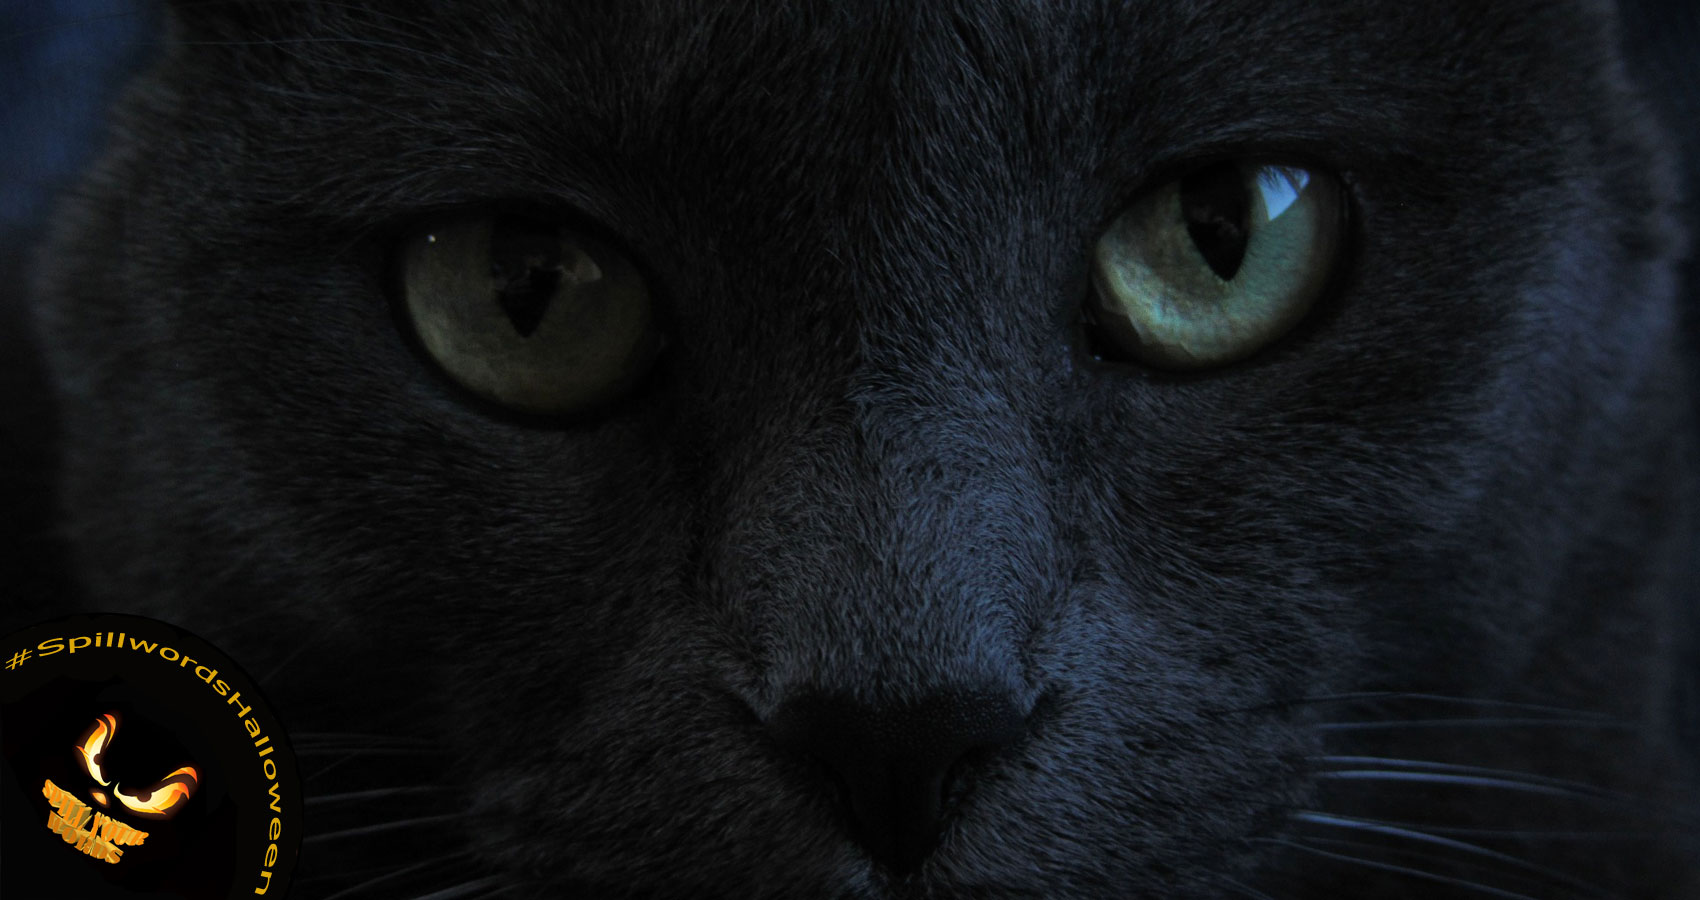 The Dark Kitty, micropoetry by Edward Donnelly at Spillwords.com